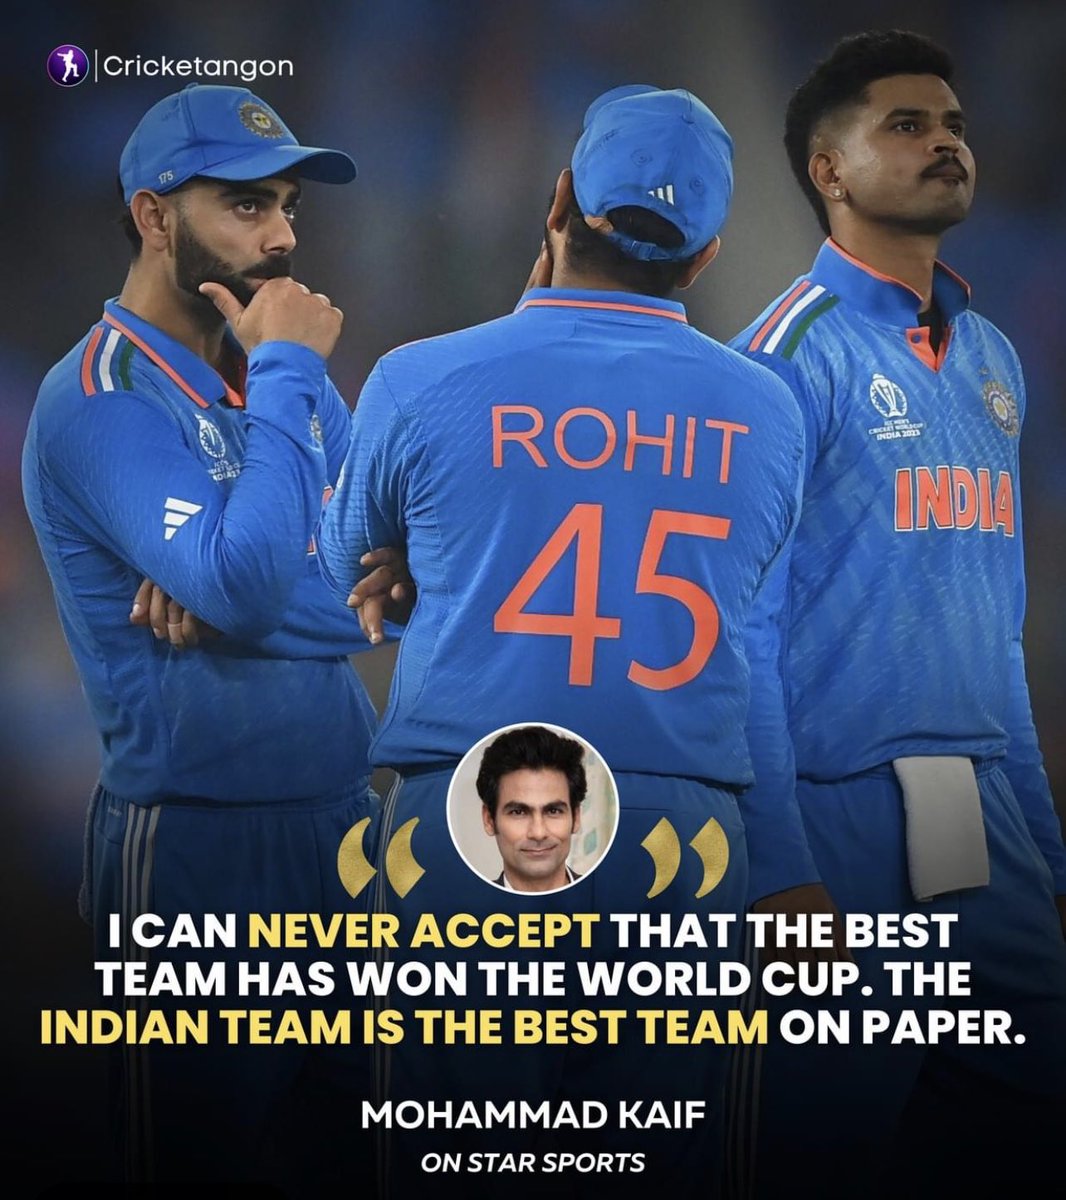 I think someone needs to remind former Indian batter, Mohammad Kaif that World Cup finals are won on a cricket field and not on paper 

🏏  #ICCCricketWorldCup  #INDvAUS